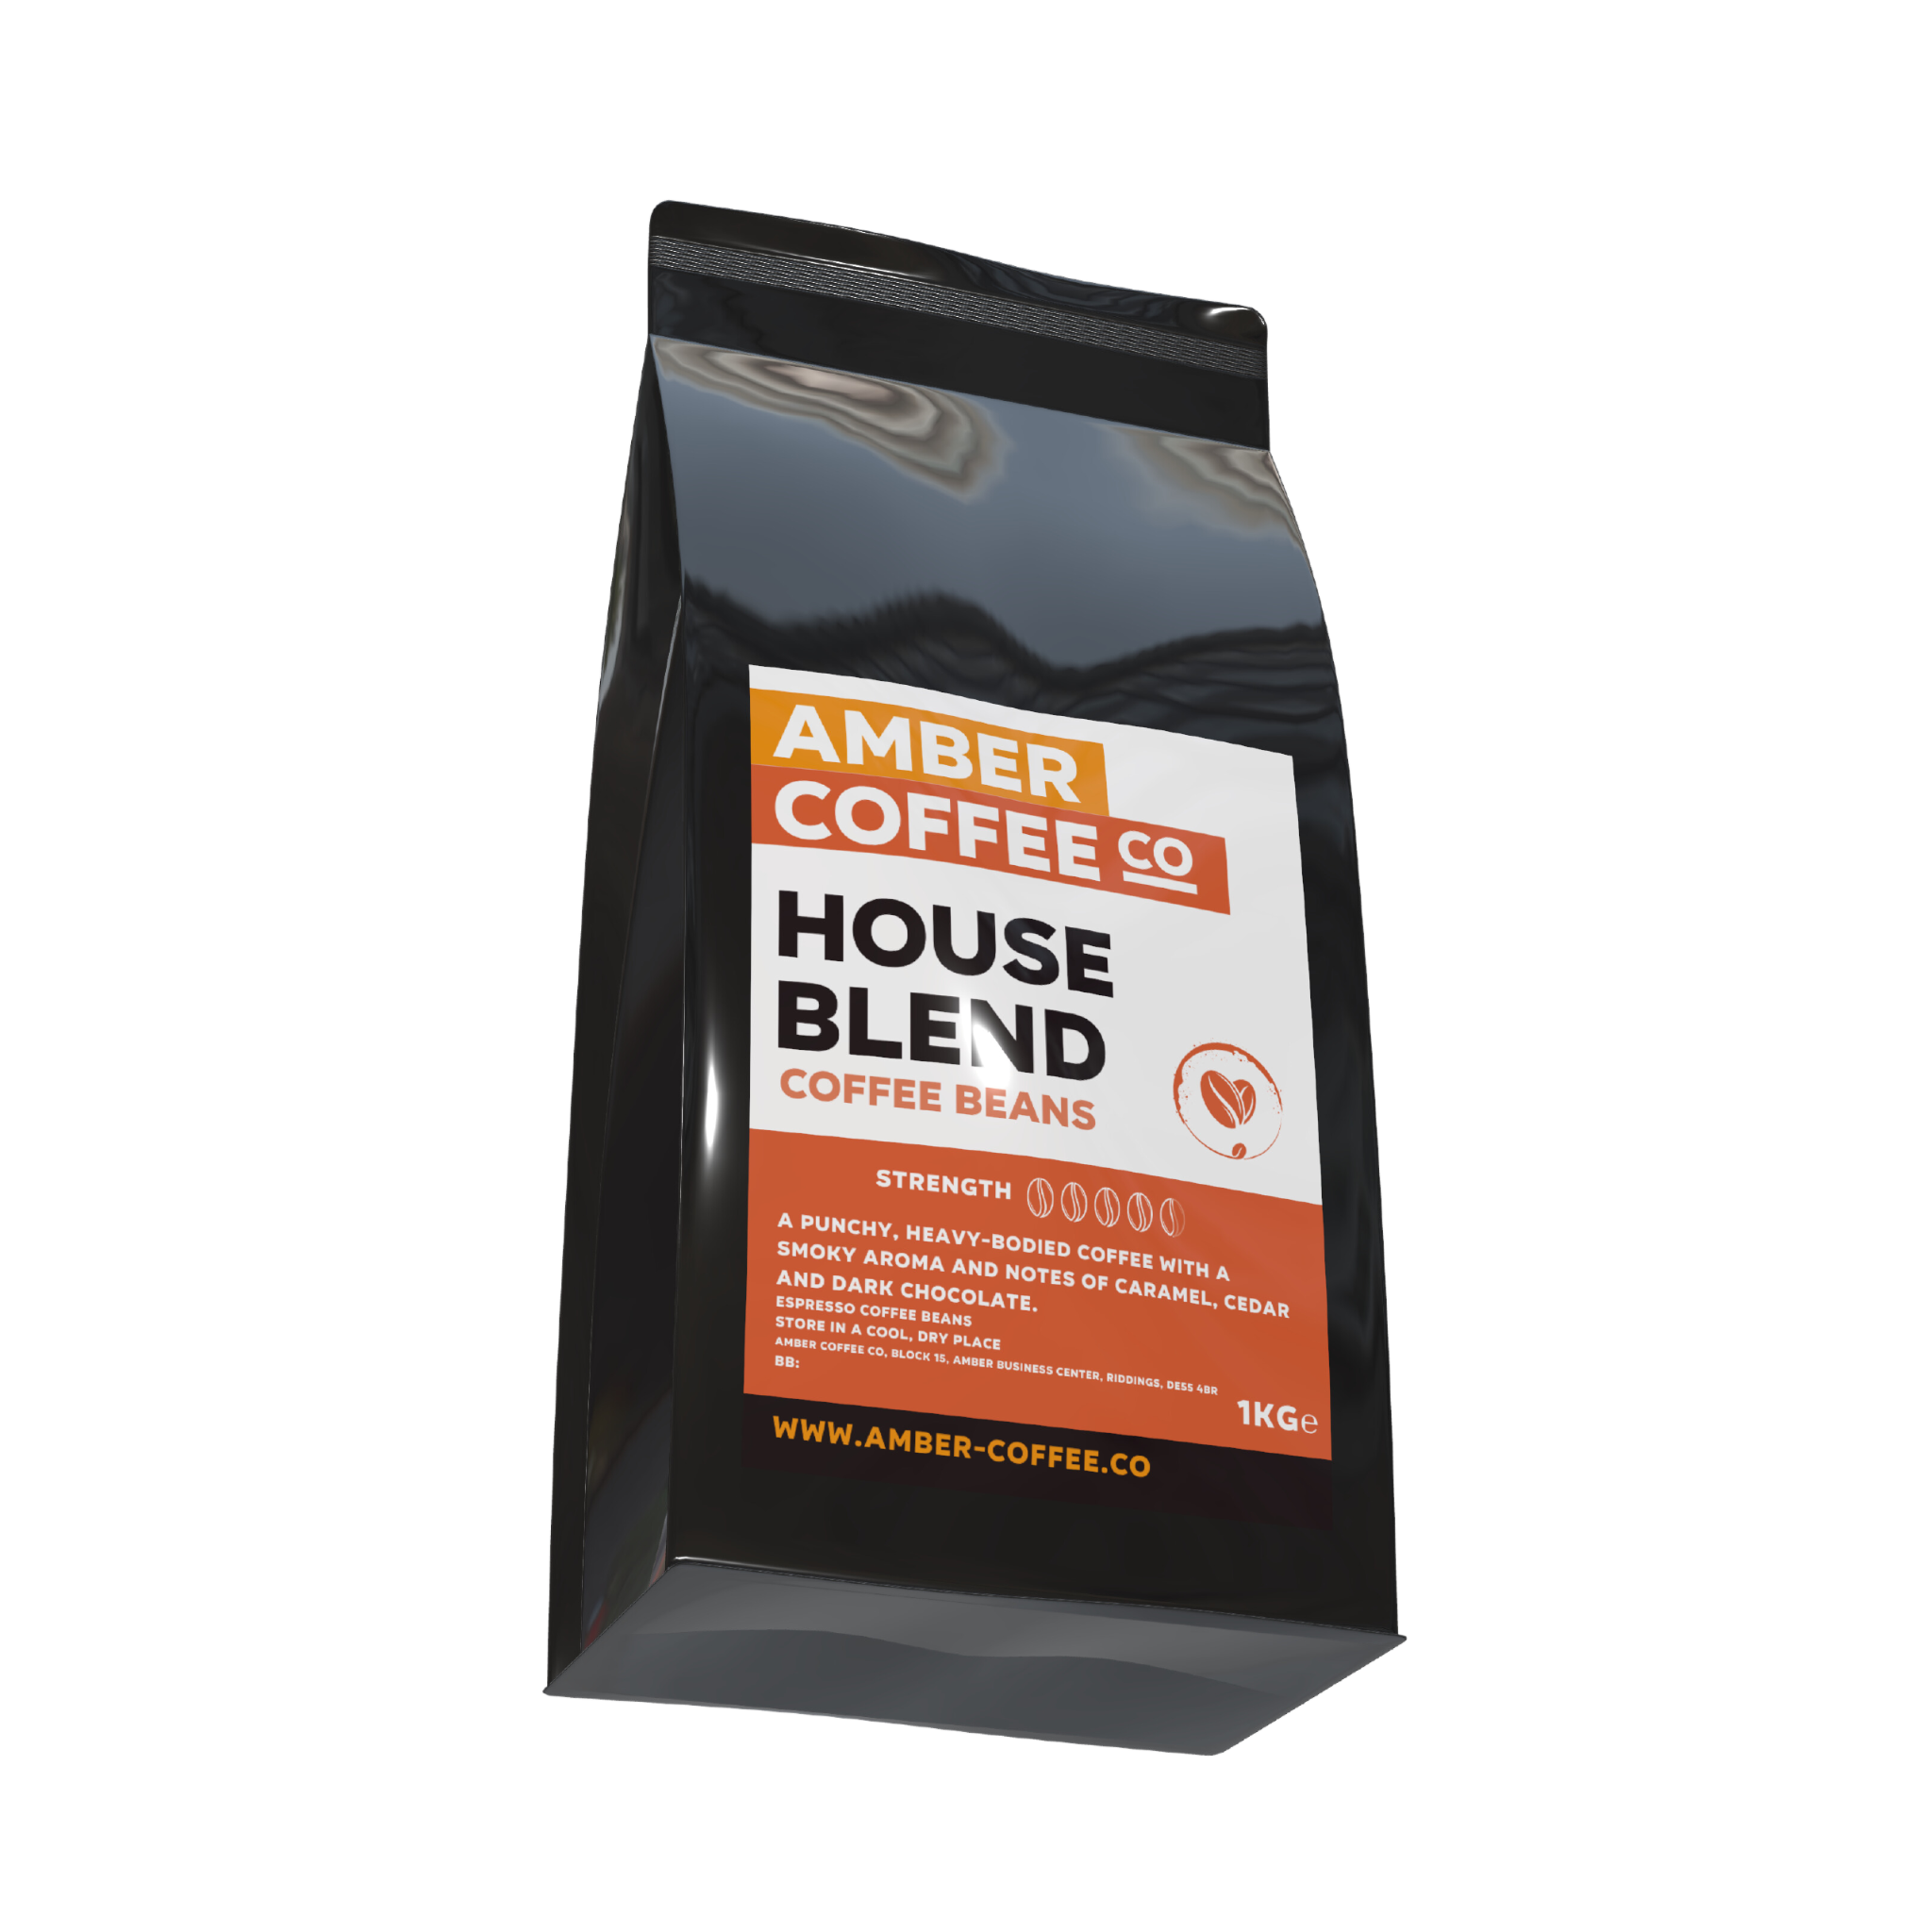 Amber Coffee Co - House Blend - Premium Coffee Beans (Full Case or 1KG Bags)